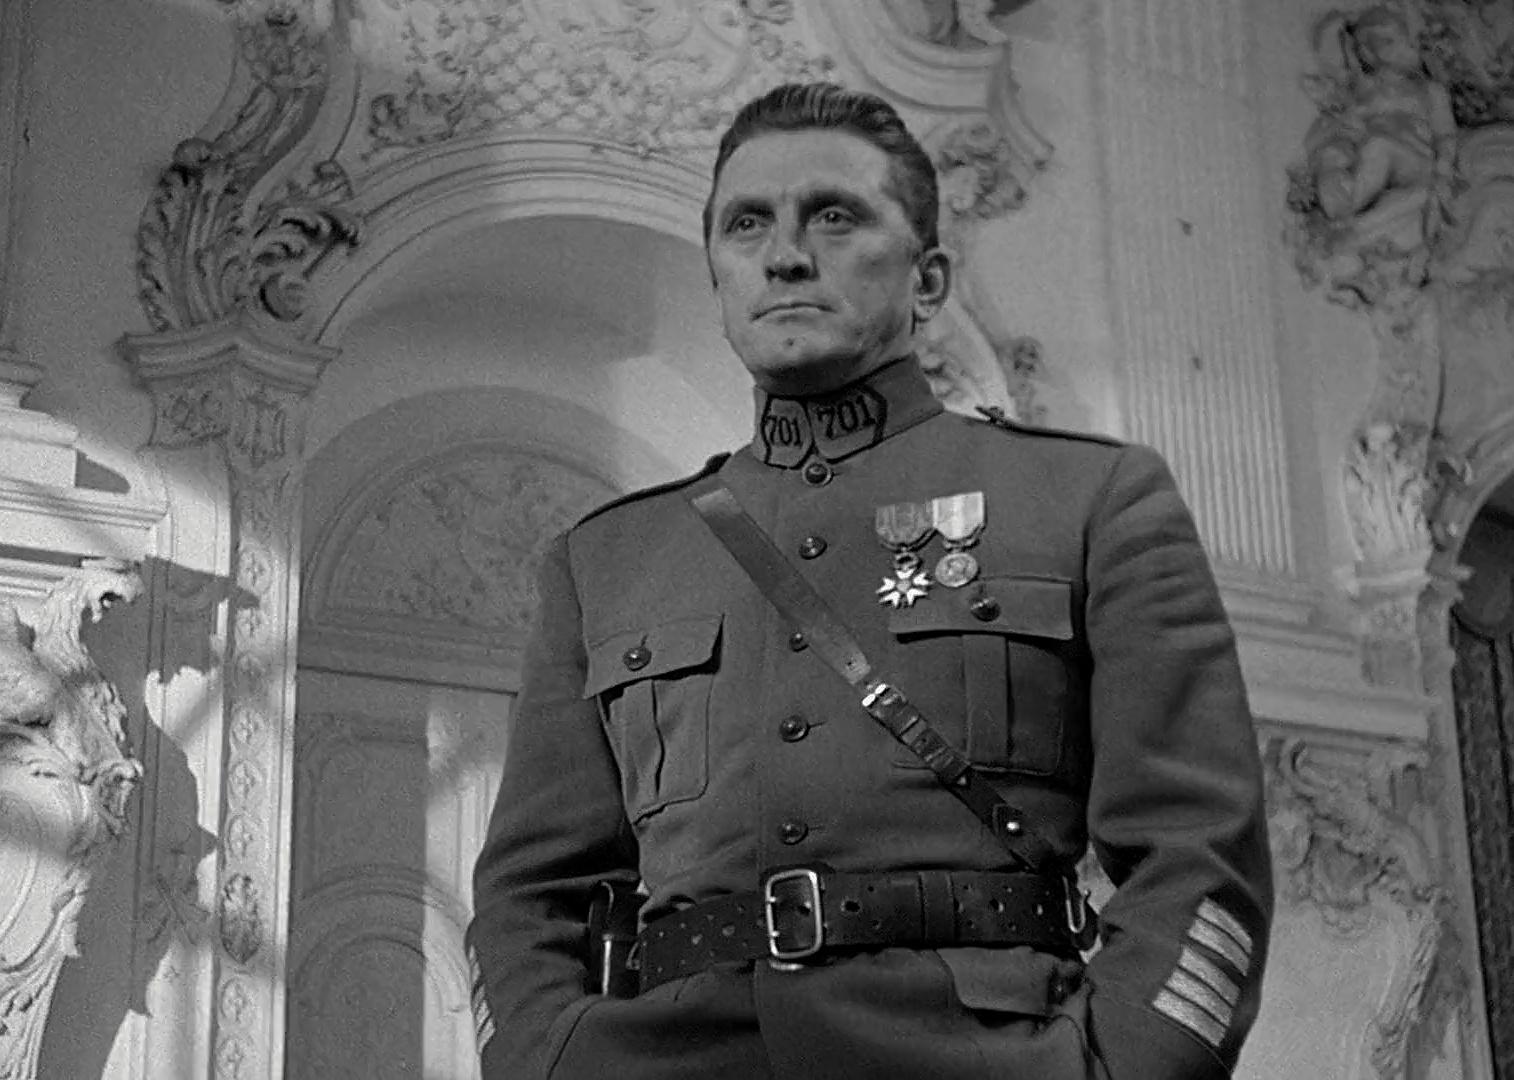 Kirk Douglas in a military uniform in a beautiful ornate historic room.